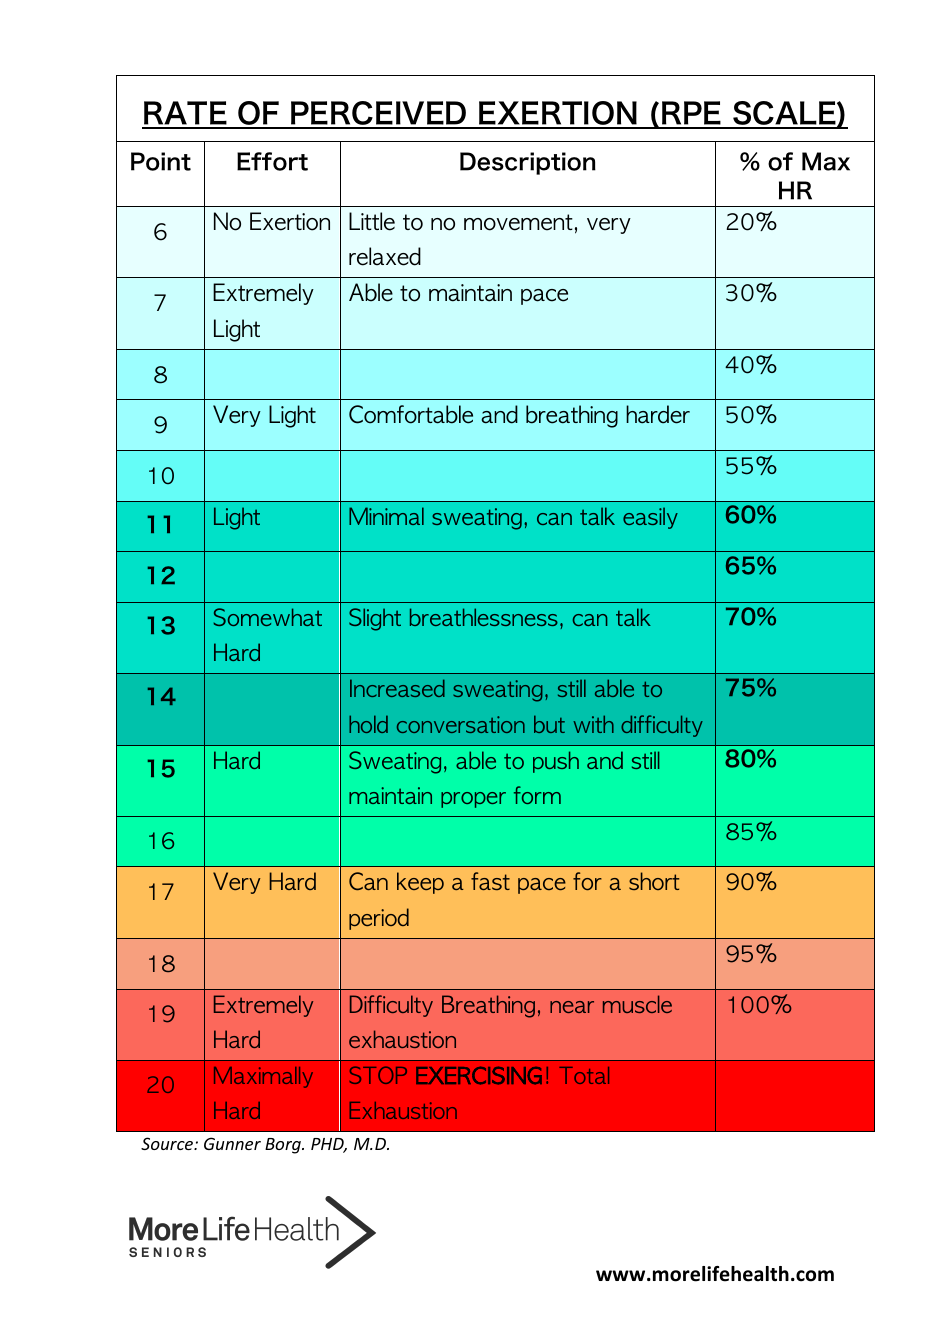 Rate of Perceived Exertion (RPE Scale) Chart - Easy to Use Visual Guide for Rating Exercise Intensity